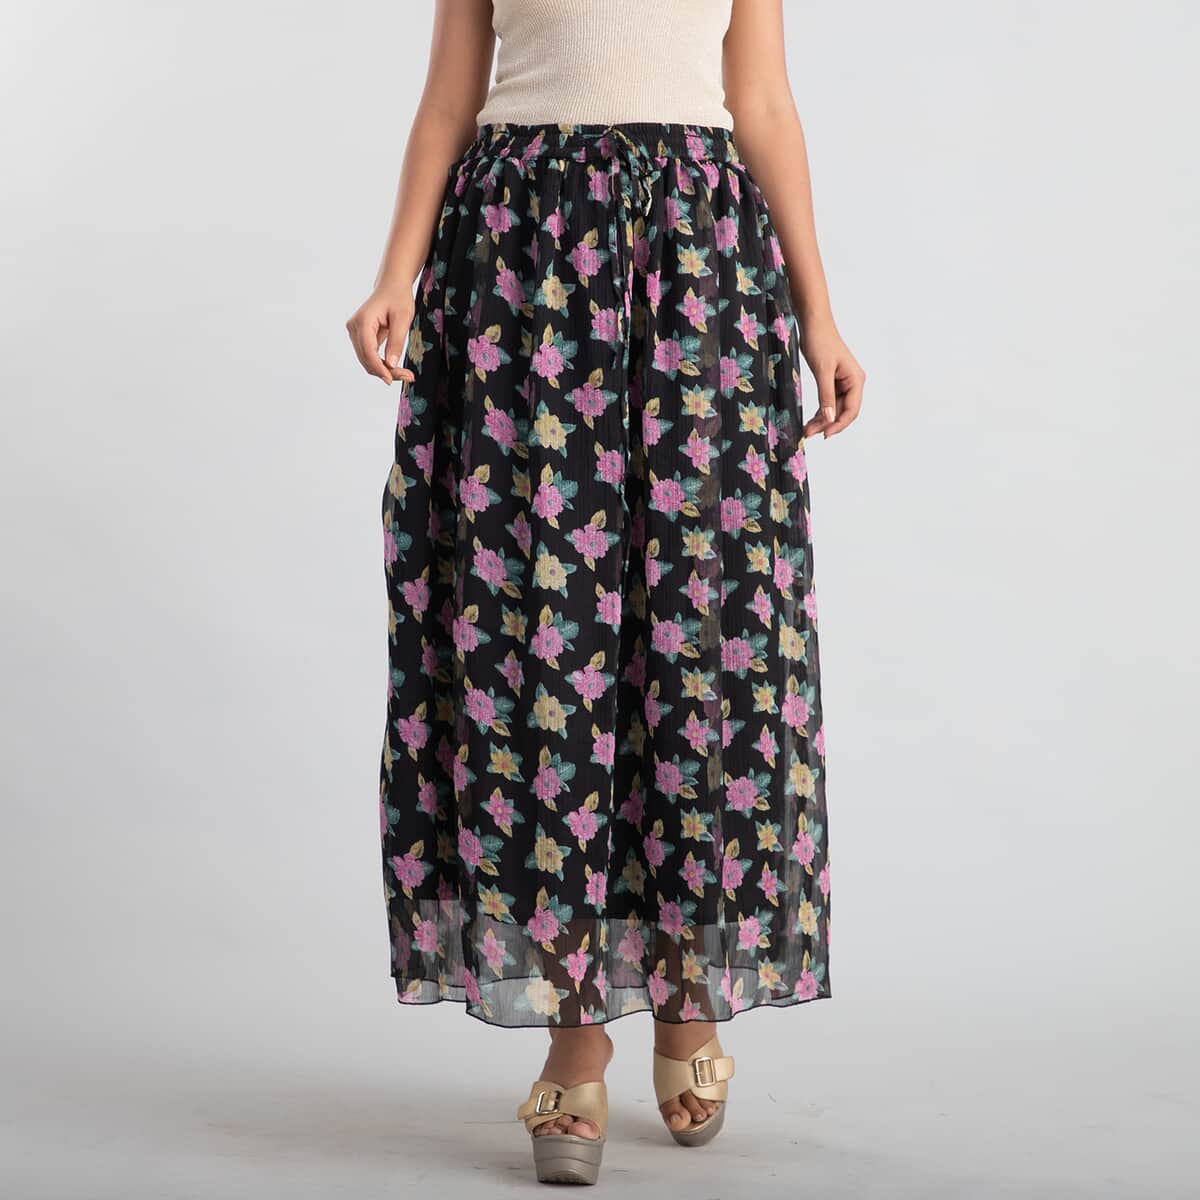 Jovie Black Floral Printed Skirt for Women with Drawstring - One Size Fits Most , Long Skirt , Summer Skirts , Women Skirt image number 0